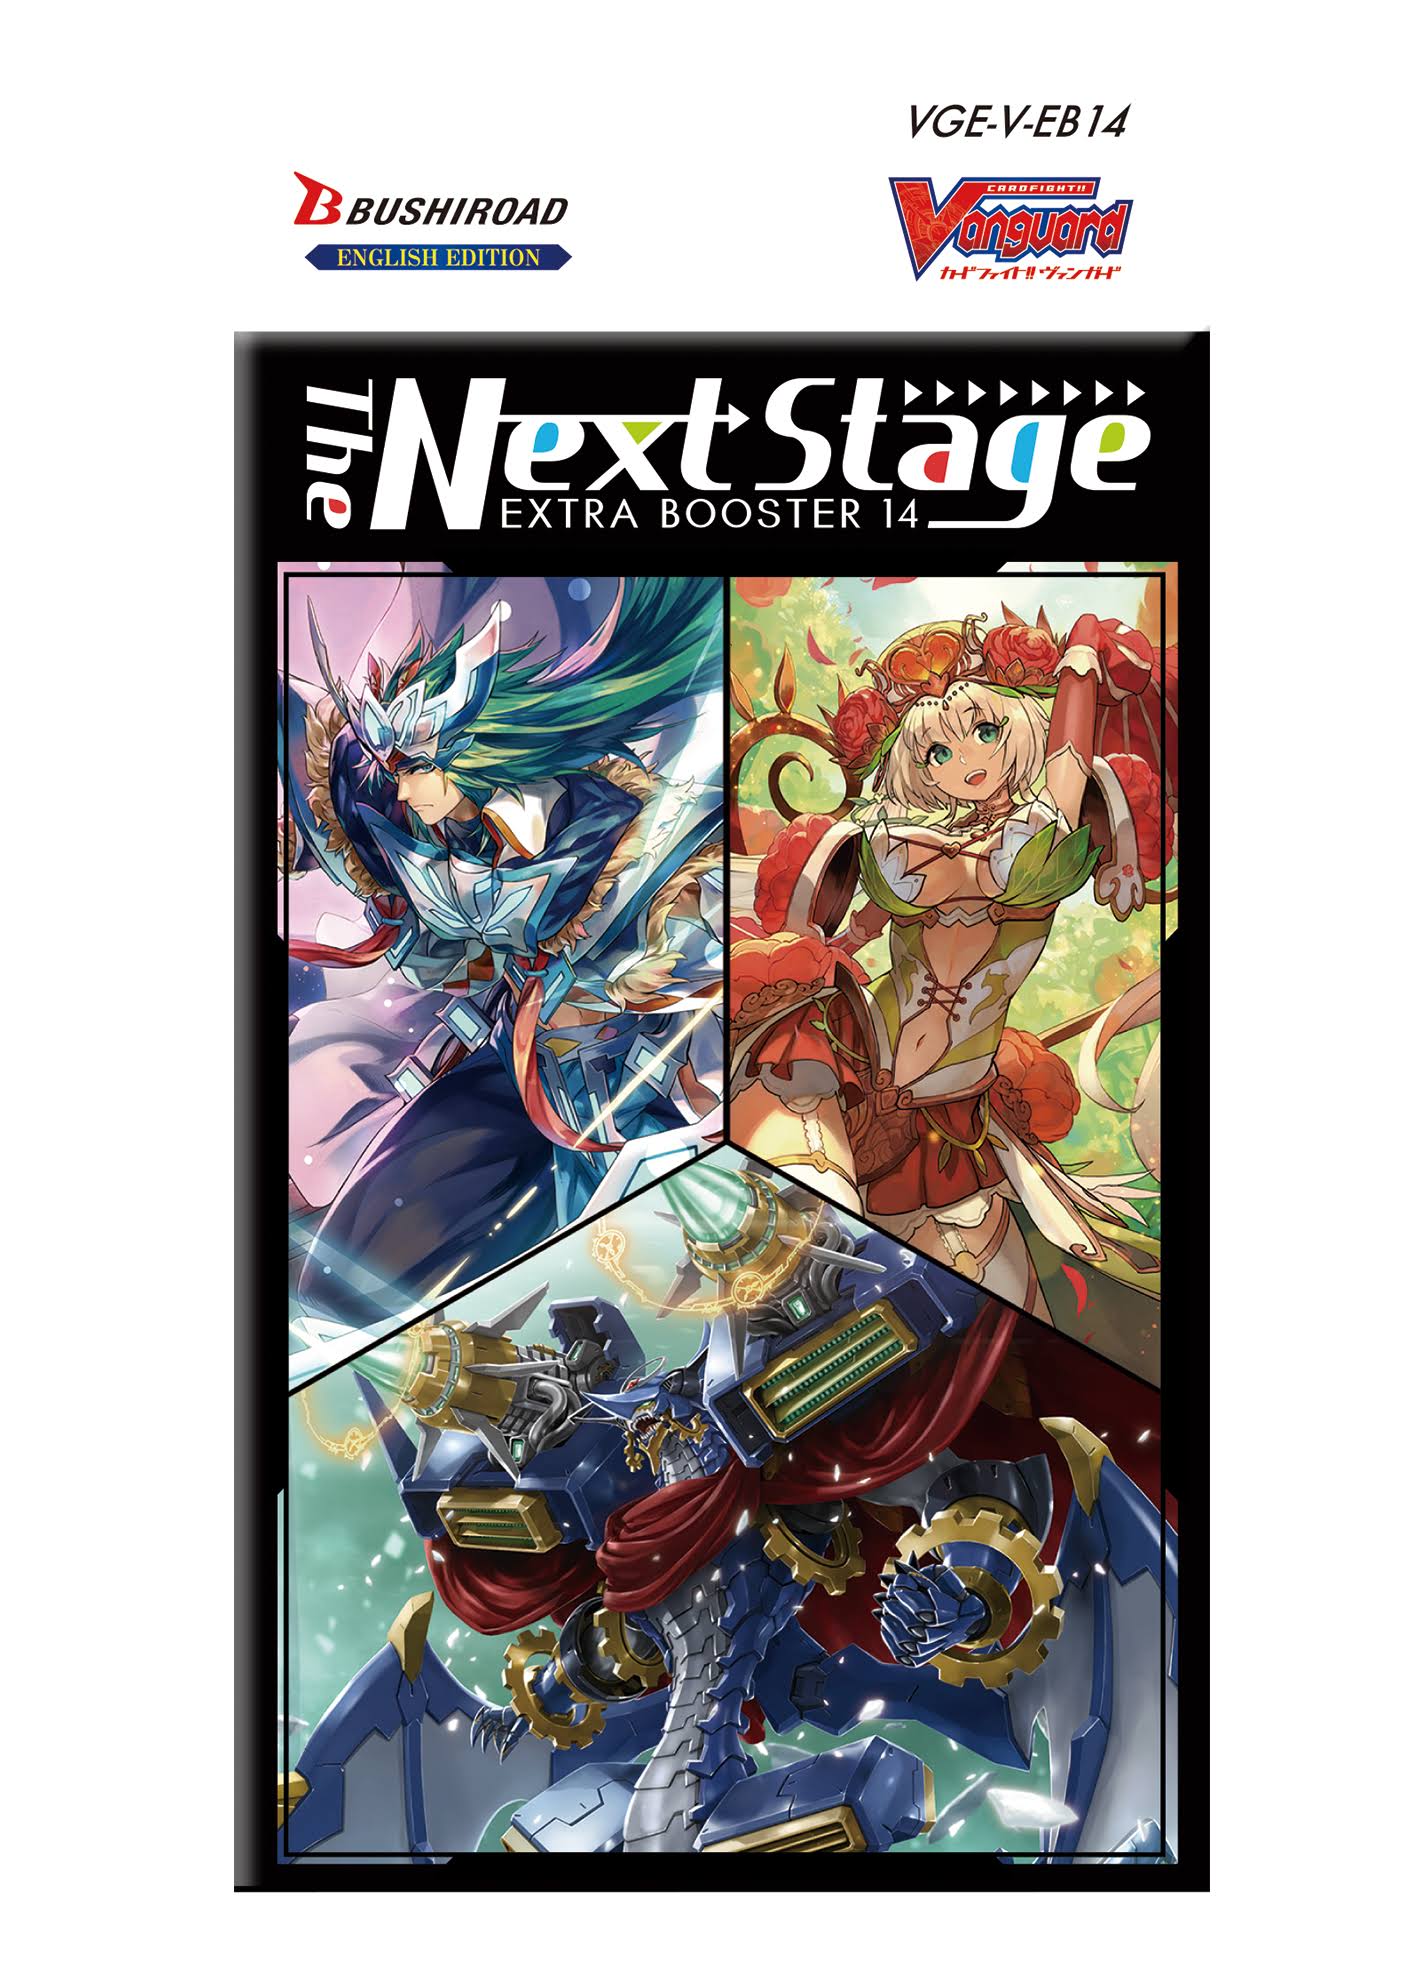 Cardfight Vanguard: The Next Stage Extra Booster Box